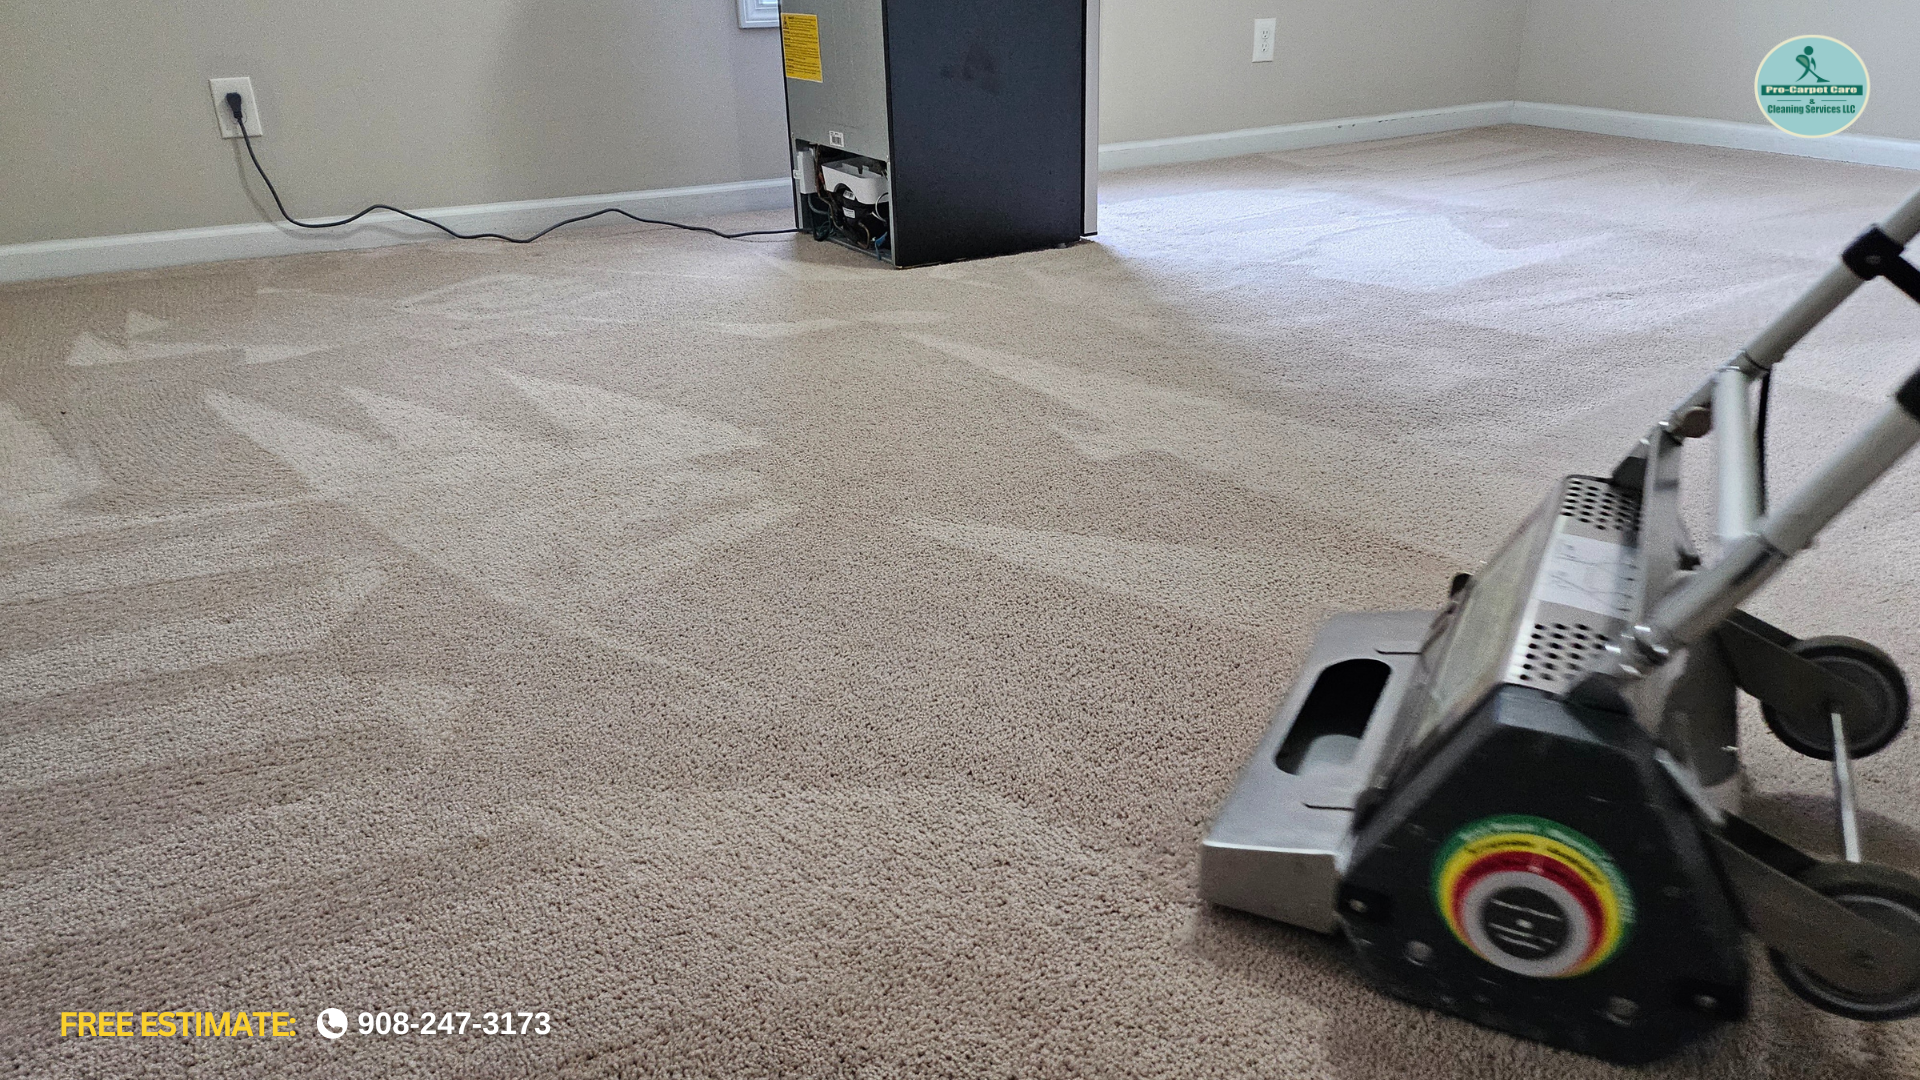 Pro Carpet Care & Cleaning services LLC - New Jersey